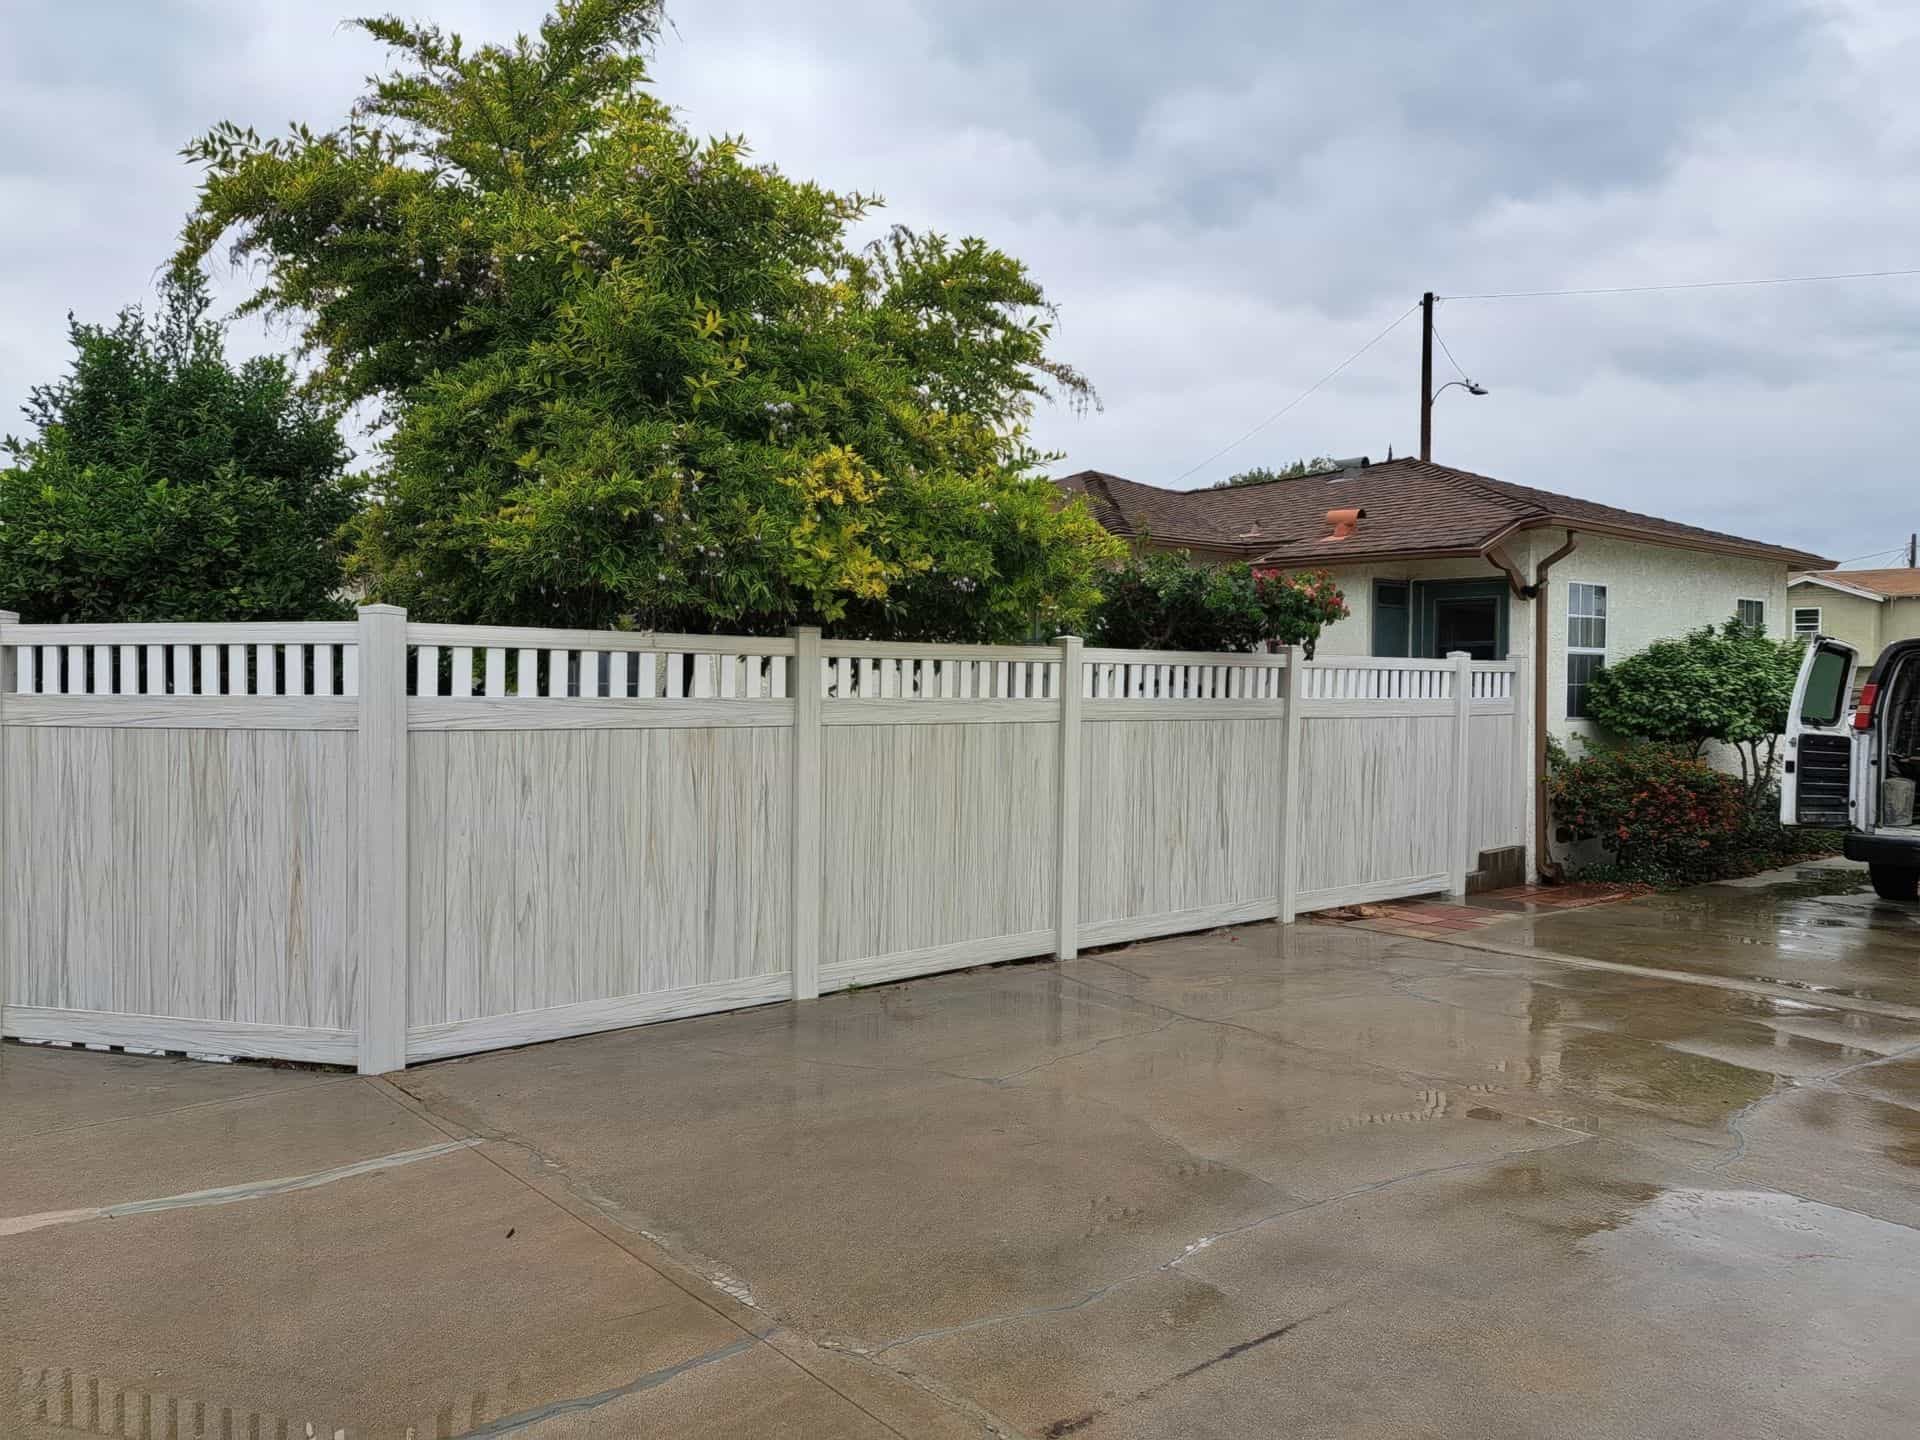 Vinyl privacy and picket fence separating concrete driveway from the other home’s garden featuring large trees and plants